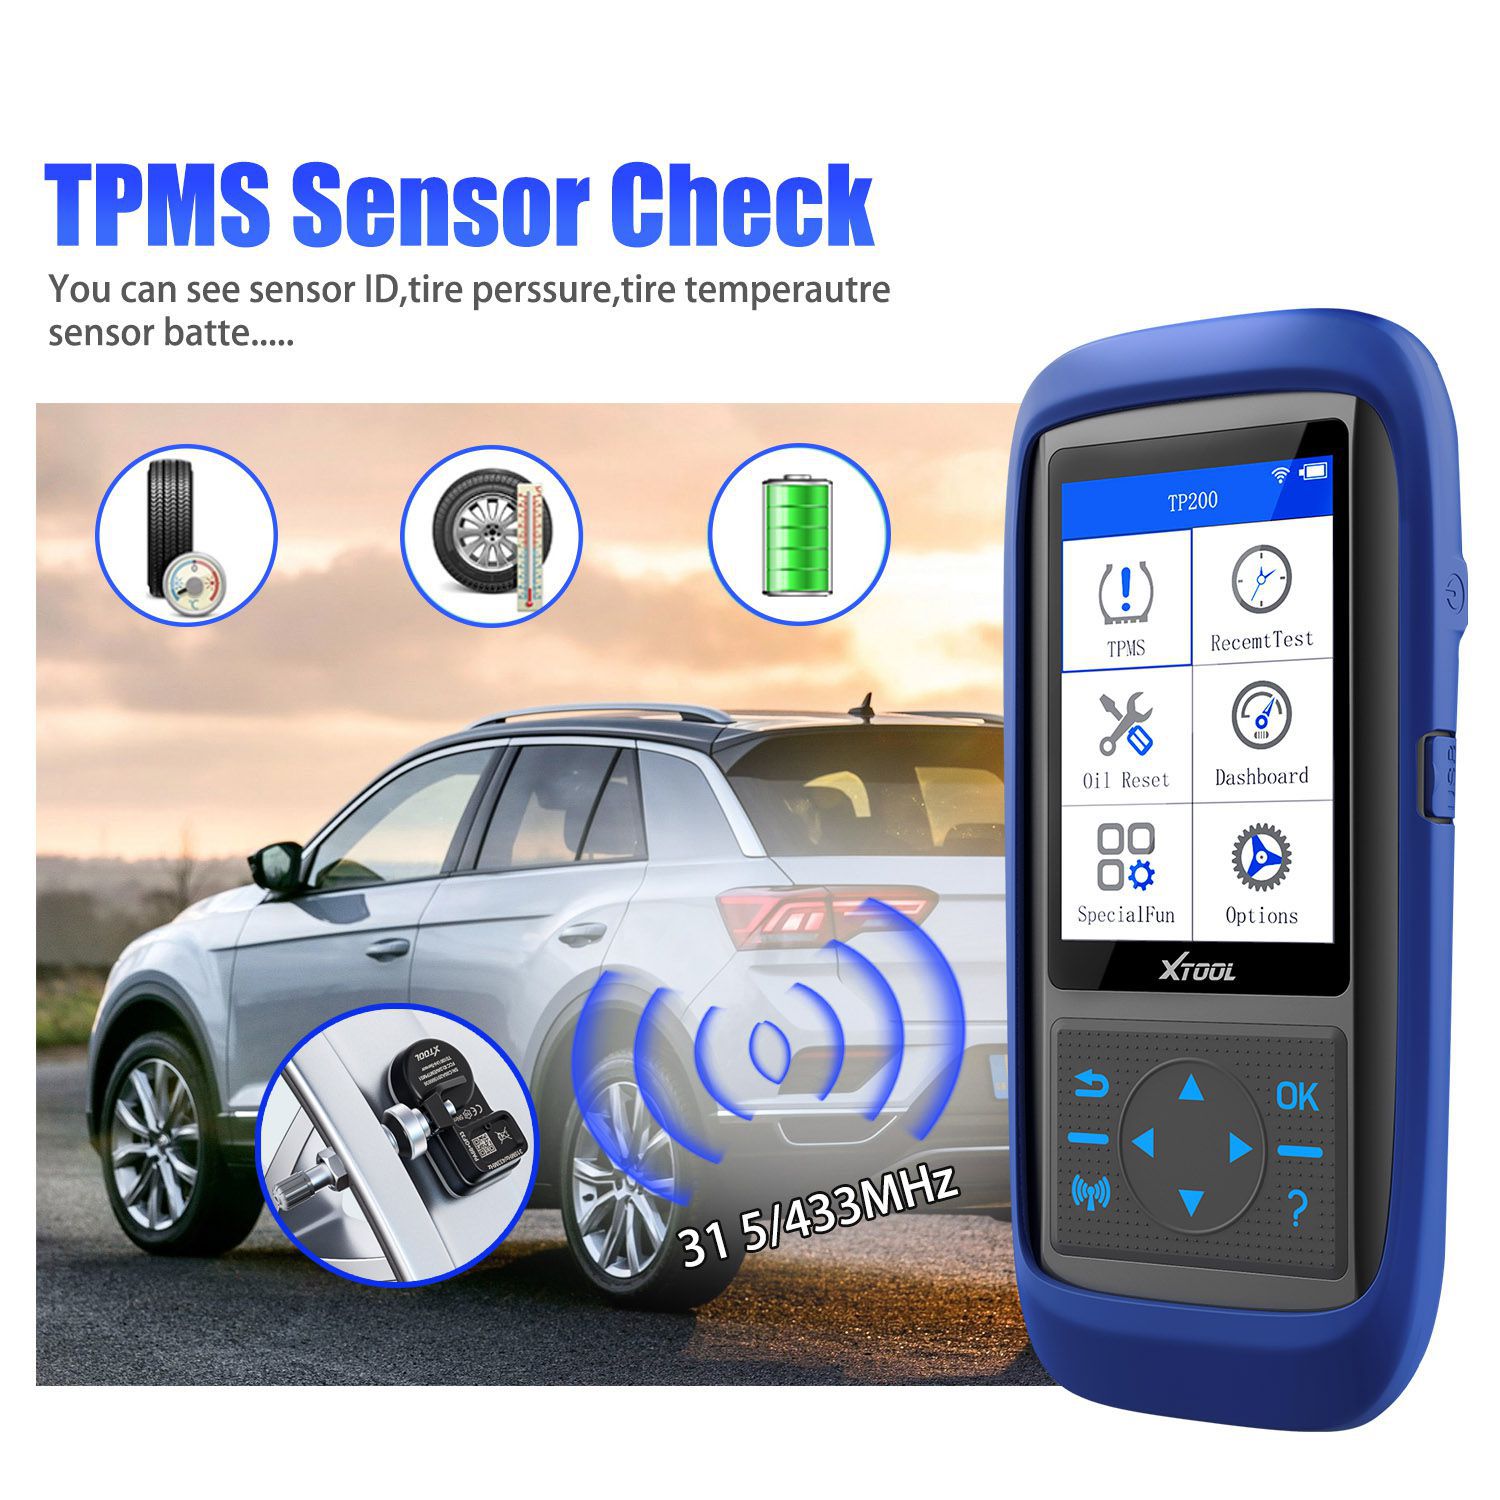 Xtool tp150 Tyre Pressure Monitoring System OBD2 TPMS scanner tool with 315 and 433 MHz Sensors